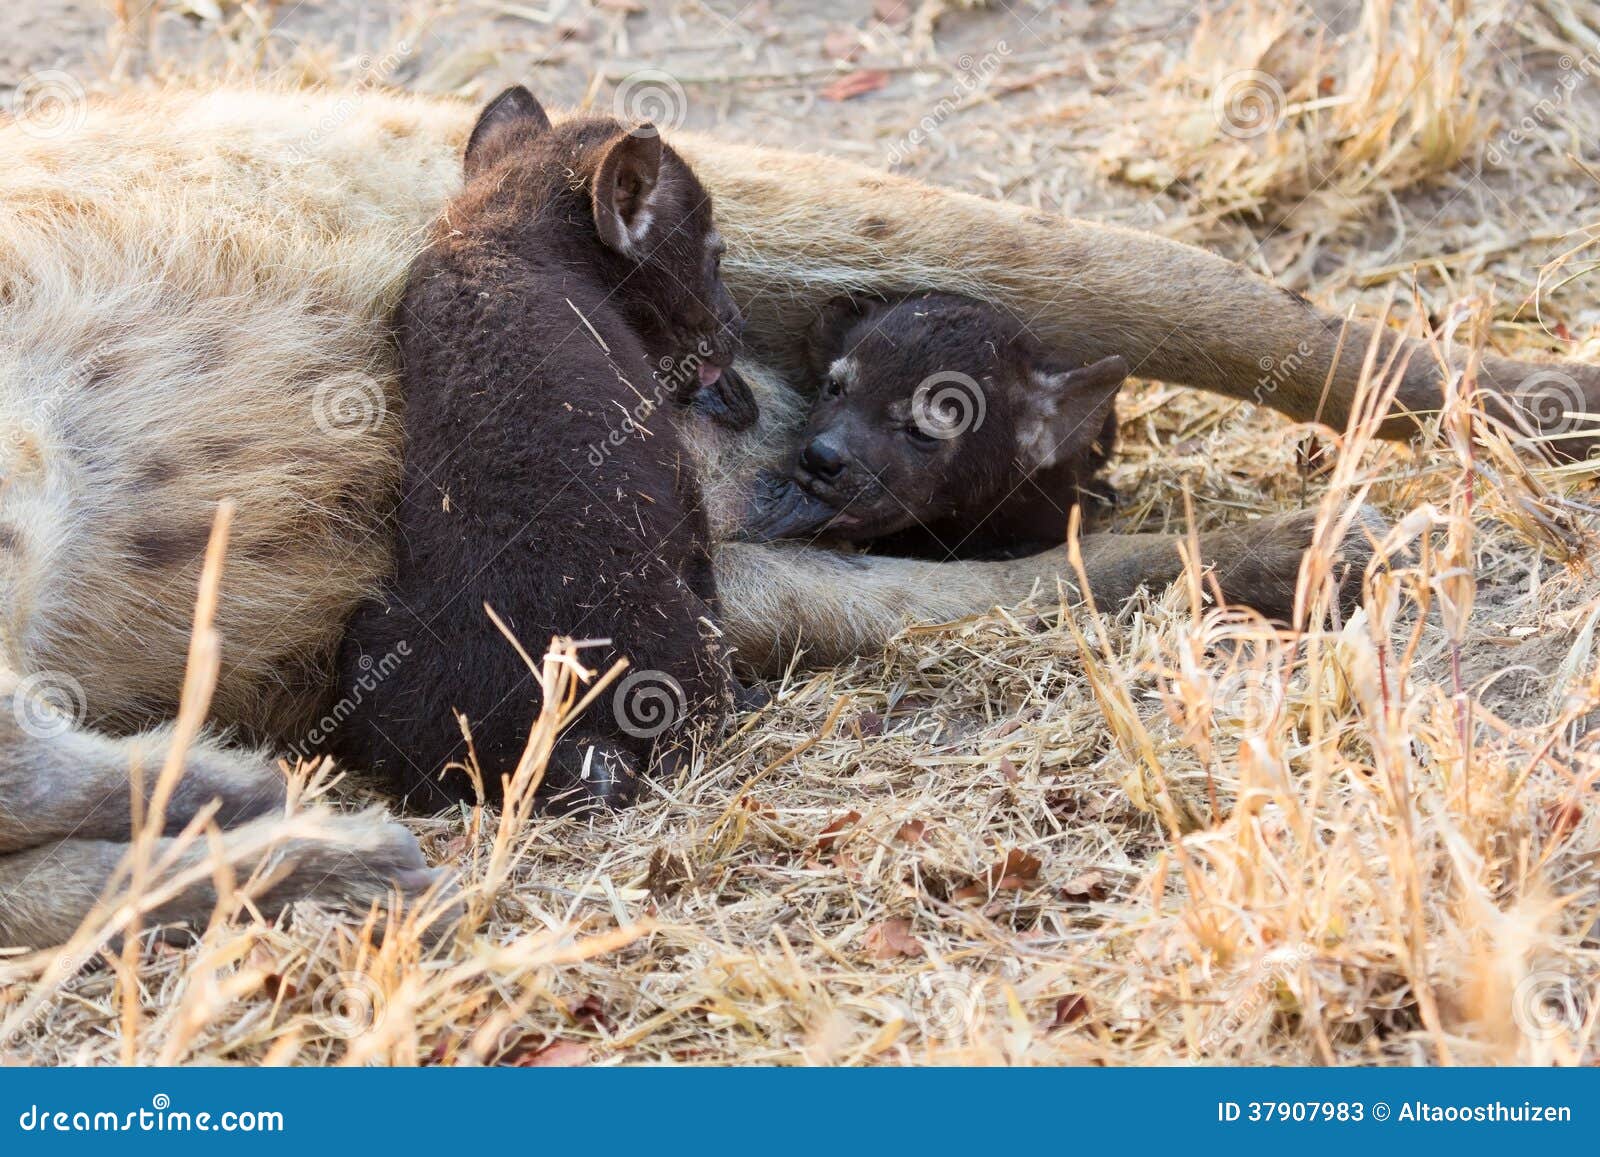 Hungry hyena pups drinking milk from mother suckle lying down